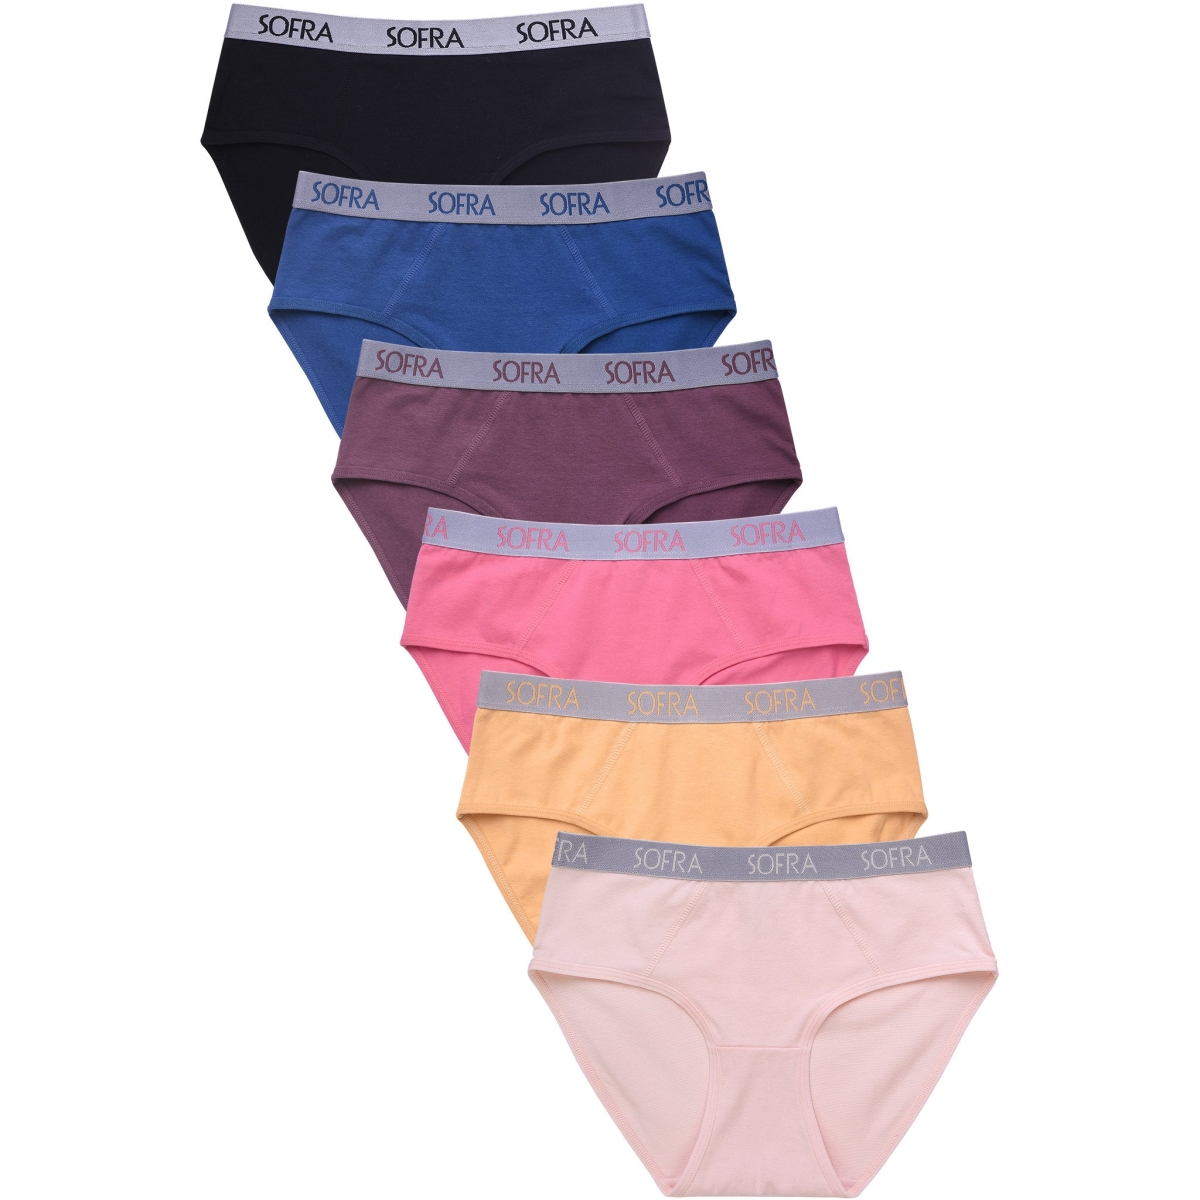 Picture of 247 Frenzy 247-LP1421CKE4-MD Womens Essentials Cotton Stretch Bikini Panty Underwear with Extended Side Seams - Assorted Color - Medium - Pack of 6